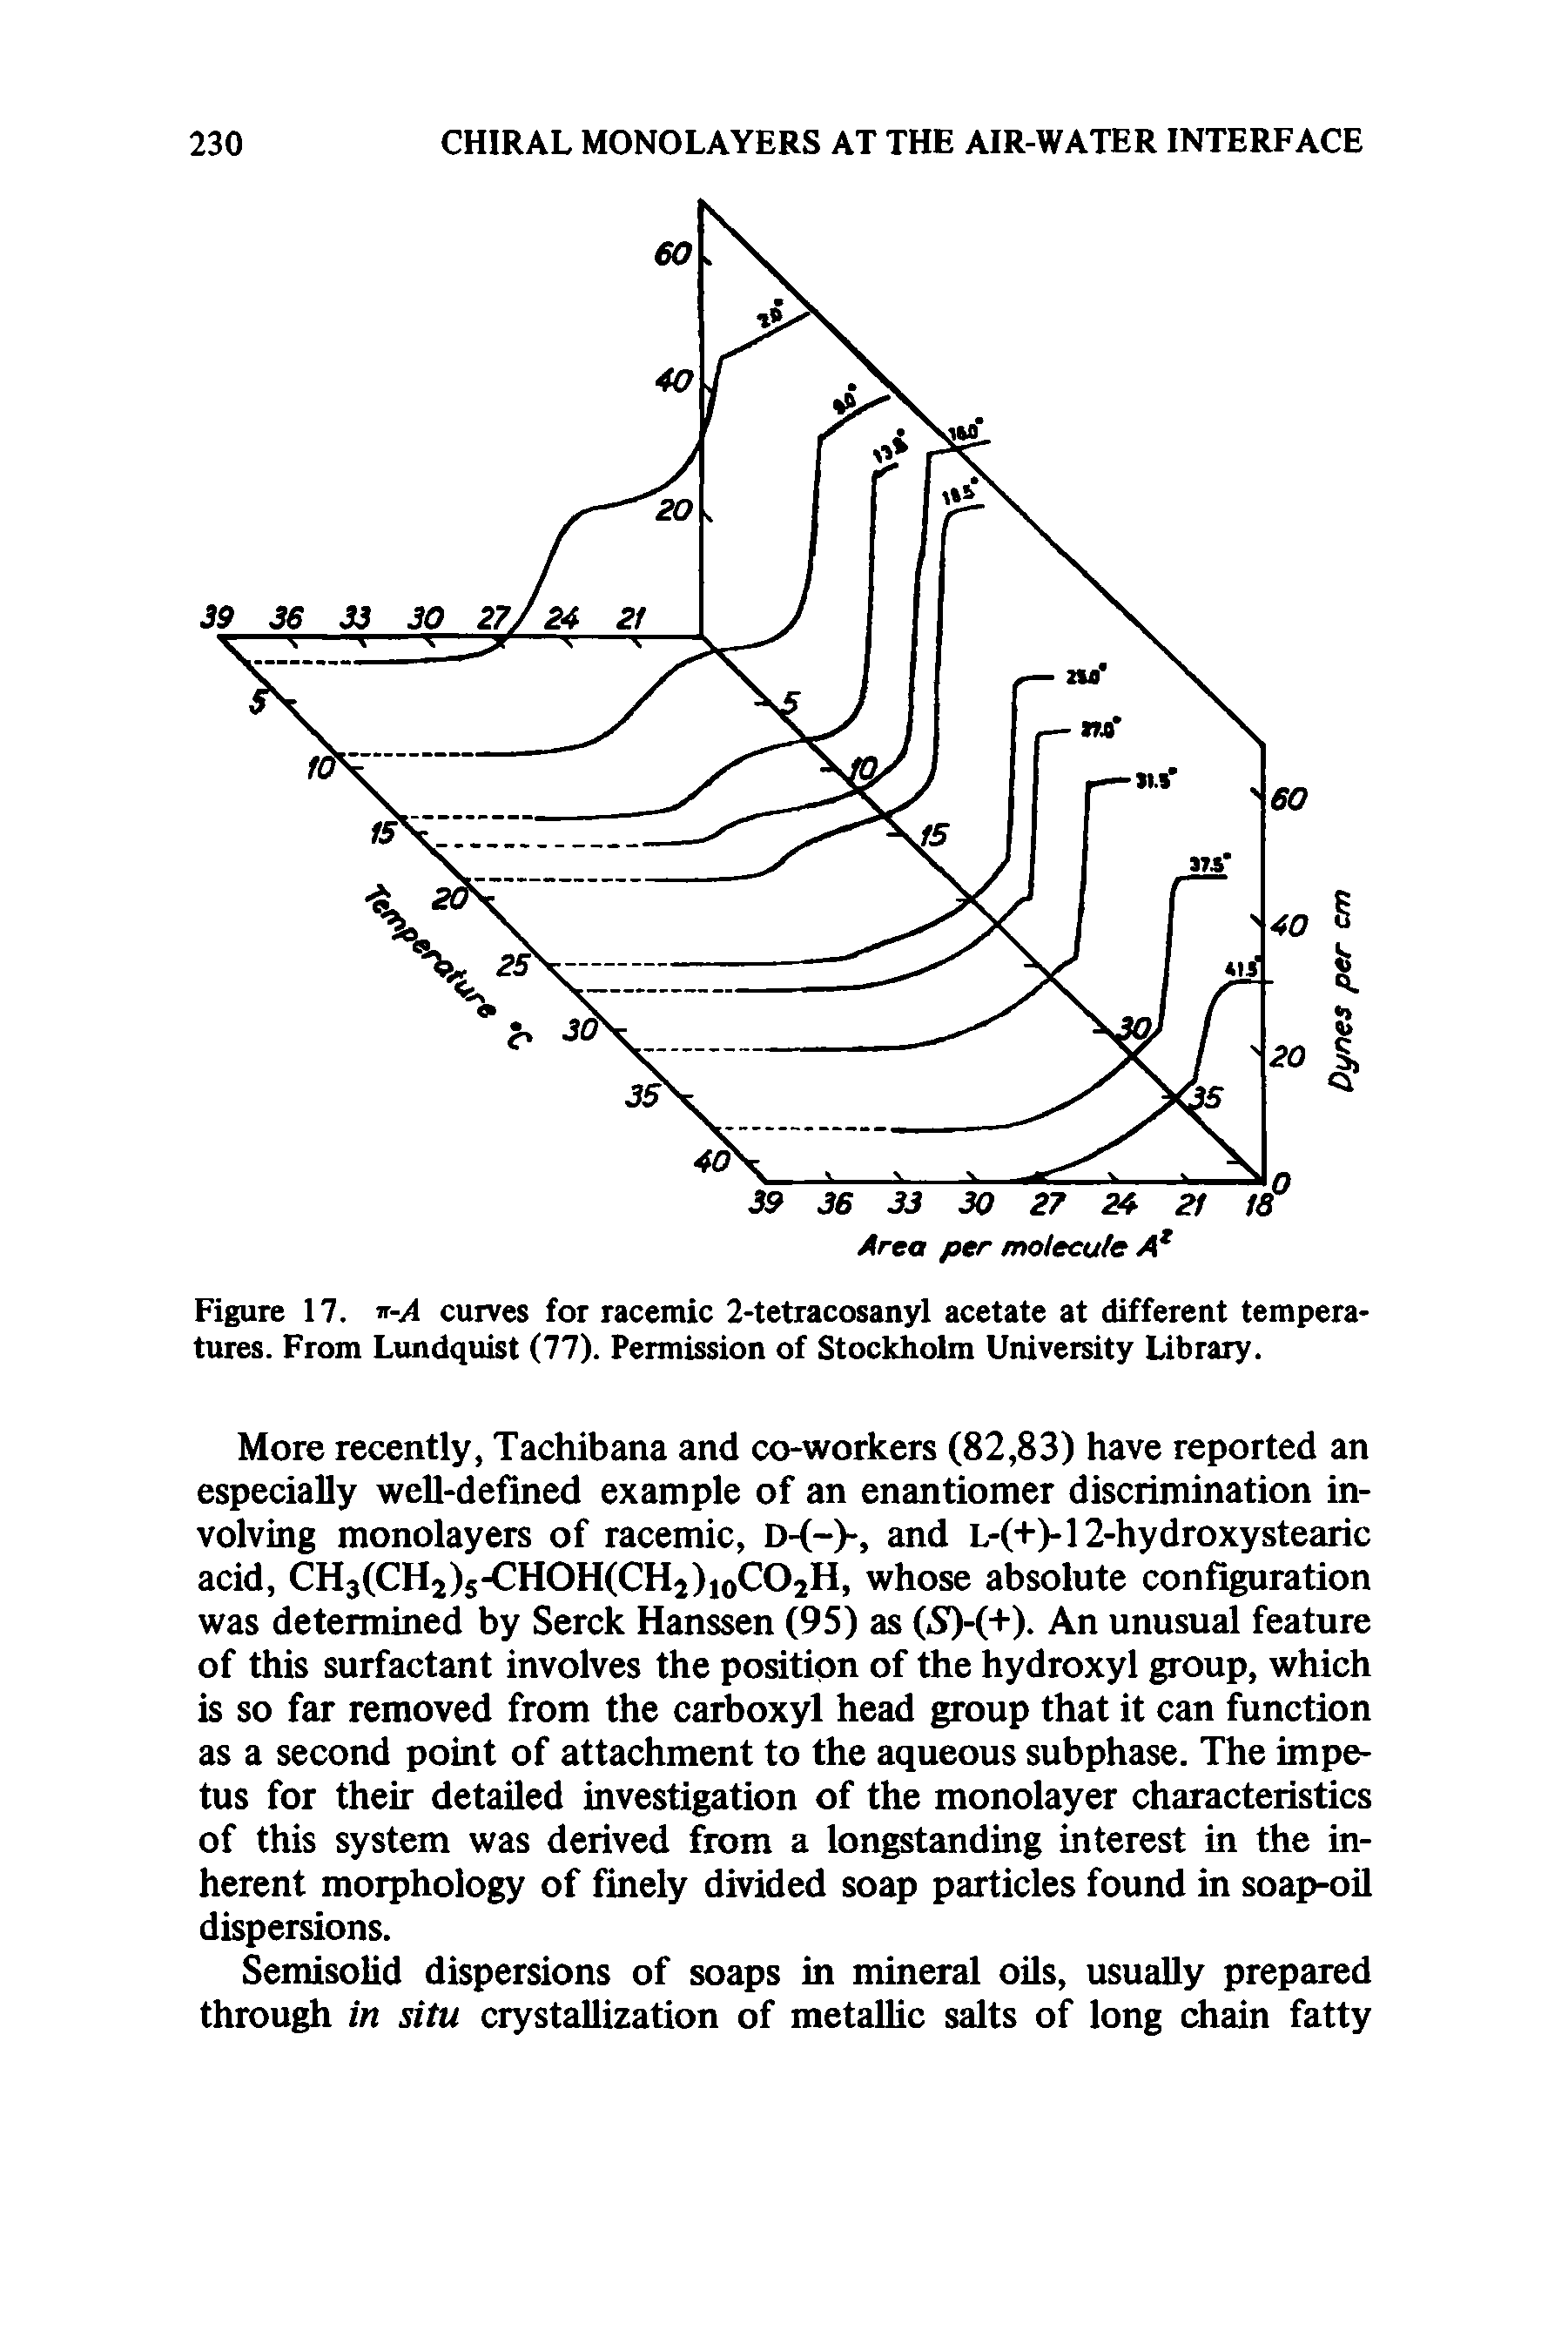 Figure 17. -A curves for racemic 2-tetracosanyl acetate at different temperatures. From Lundquist (77). Permission of Stockholm University Library.